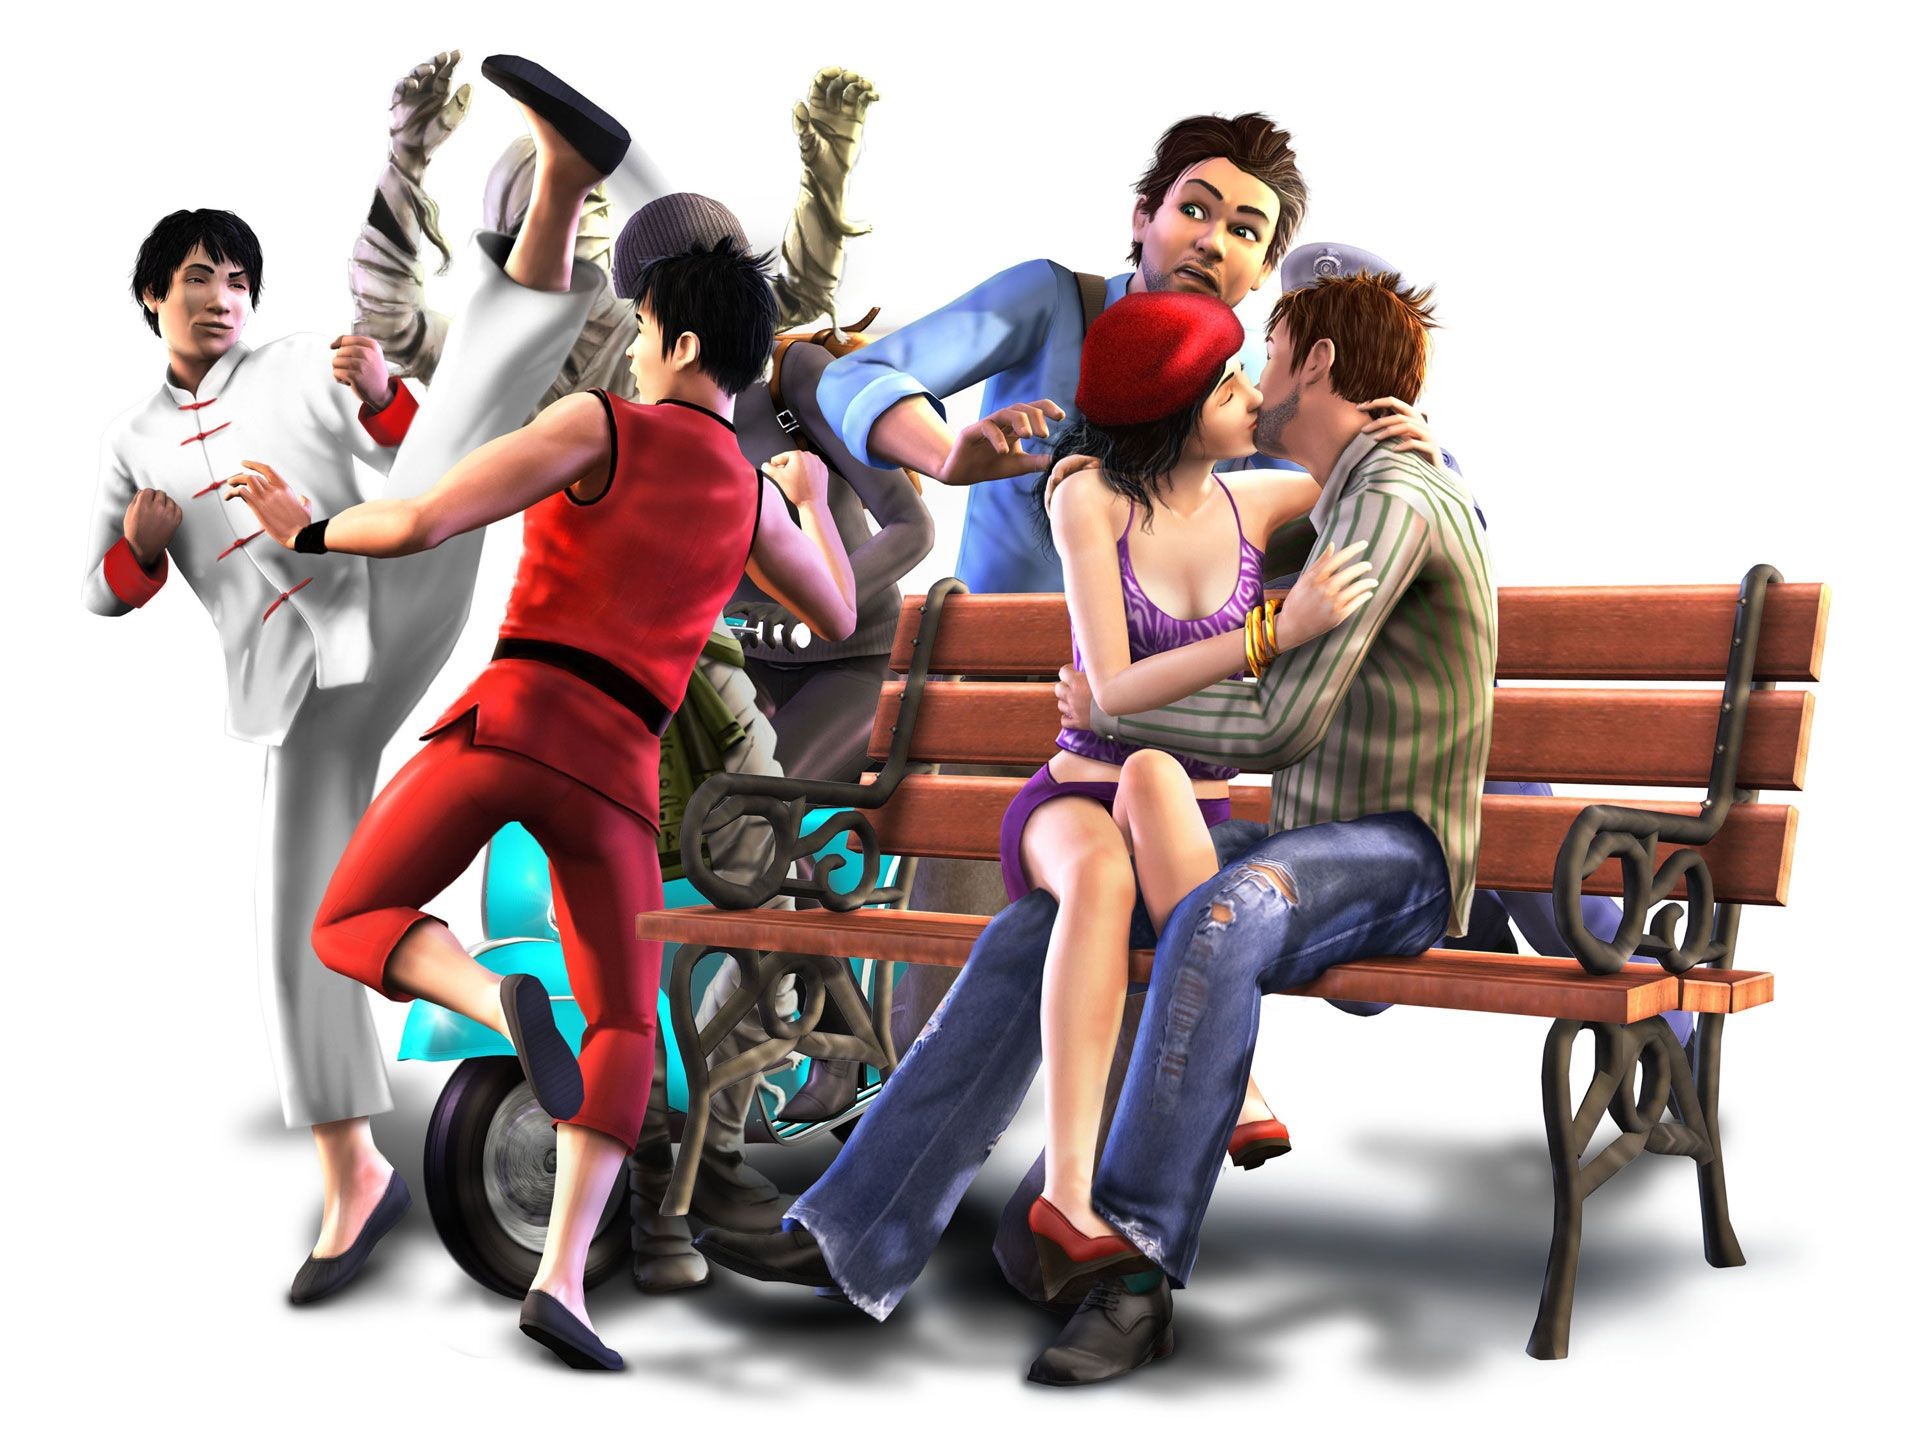 1920x1440 The Sims 3 World Adventures Hd Wallpapers http://www.nicewallpapers.in